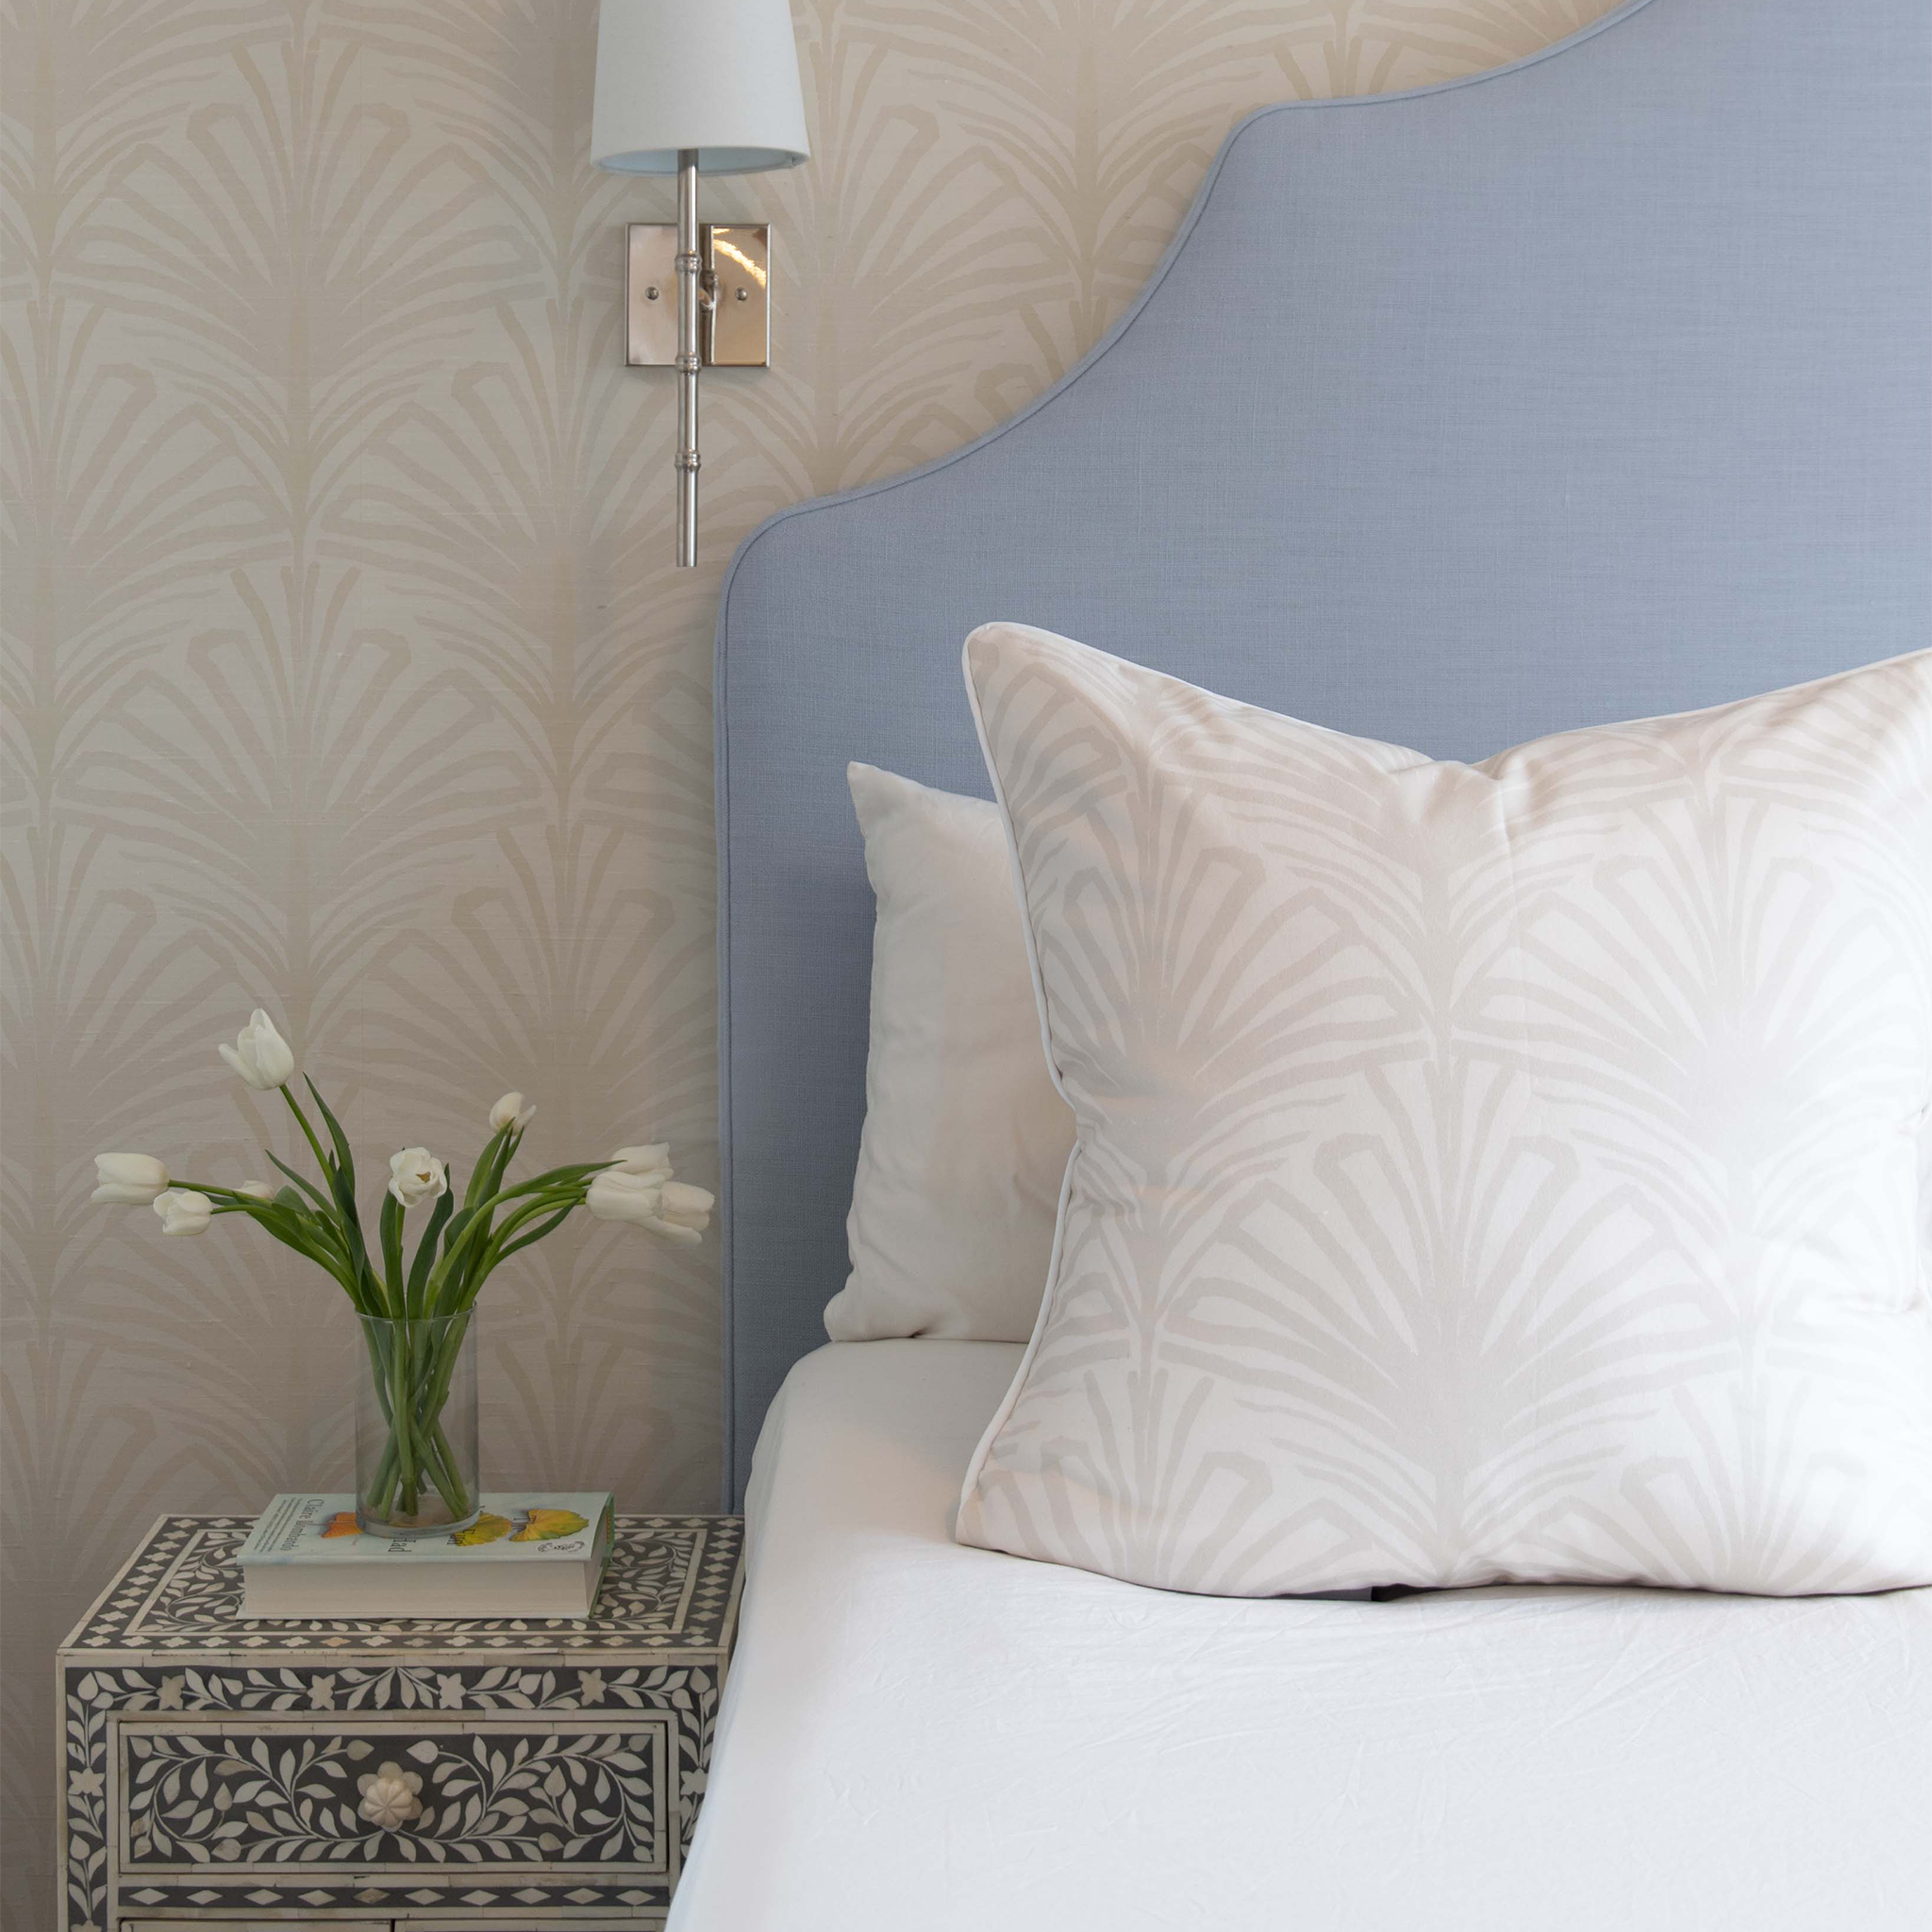 White bed close-up styled with Beige Palm Printed Pillow matching the beige palm printed wallpaper over white and blue nightstand with white tulips in clear vase on top of book